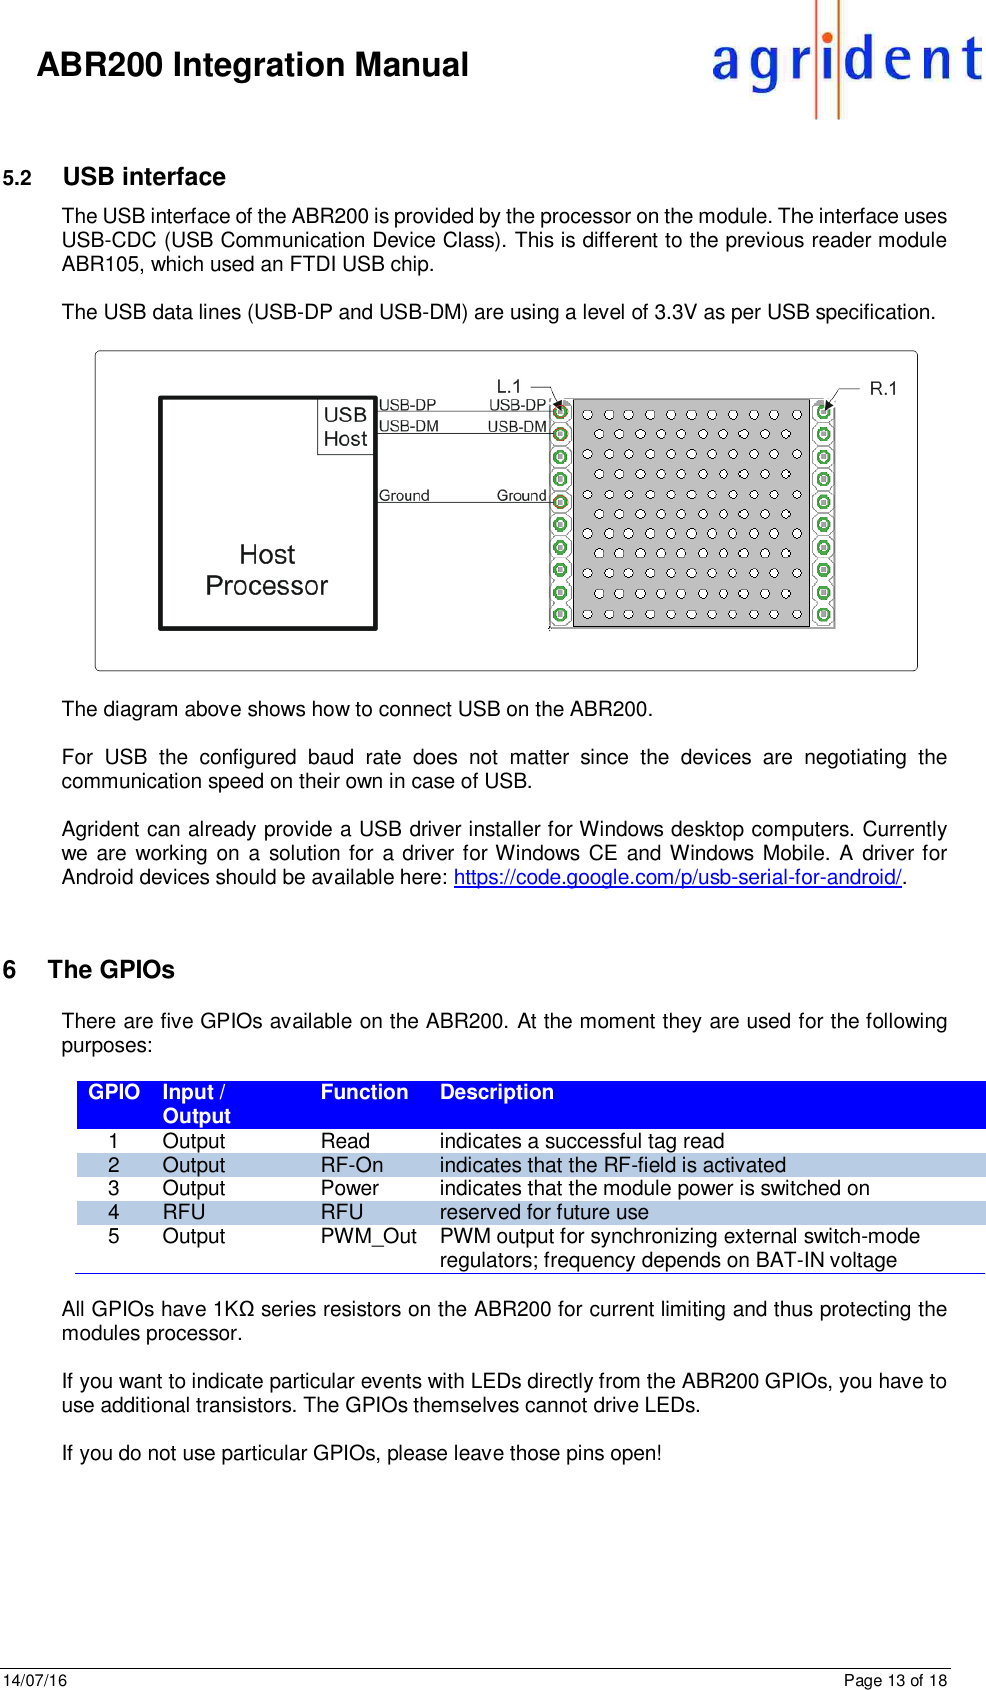 14/07/16      Page 13 of 18      ABR200 Integration Manual  5.2  USB interface The USB interface of the ABR200 is provided by the processor on the module. The interface uses USB-CDC (USB Communication Device Class). This is different to the previous reader module ABR105, which used an FTDI USB chip.  The USB data lines (USB-DP and USB-DM) are using a level of 3.3V as per USB specification.    The diagram above shows how to connect USB on the ABR200.  For  USB  the  configured  baud  rate  does  not  matter  since  the  devices  are  negotiating  the communication speed on their own in case of USB.  Agrident can already provide a USB driver installer for Windows desktop computers. Currently we  are  working on a  solution for a driver for Windows CE and Windows Mobile. A  driver for Android devices should be available here: https://code.google.com/p/usb-serial-for-android/.   6  The GPIOs There are five GPIOs available on the ABR200. At the moment they are used for the following purposes:  GPIO Input / Output Function Description 1 Output Read indicates a successful tag read 2 Output RF-On indicates that the RF-field is activated 3 Output Power indicates that the module power is switched on 4 RFU RFU reserved for future use 5 Output PWM_Out PWM output for synchronizing external switch-mode regulators; frequency depends on BAT-IN voltage  All GPIOs have 1KΩ series resistors on the ABR200 for current limiting and thus protecting the modules processor.  If you want to indicate particular events with LEDs directly from the ABR200 GPIOs, you have to use additional transistors. The GPIOs themselves cannot drive LEDs.  If you do not use particular GPIOs, please leave those pins open!   